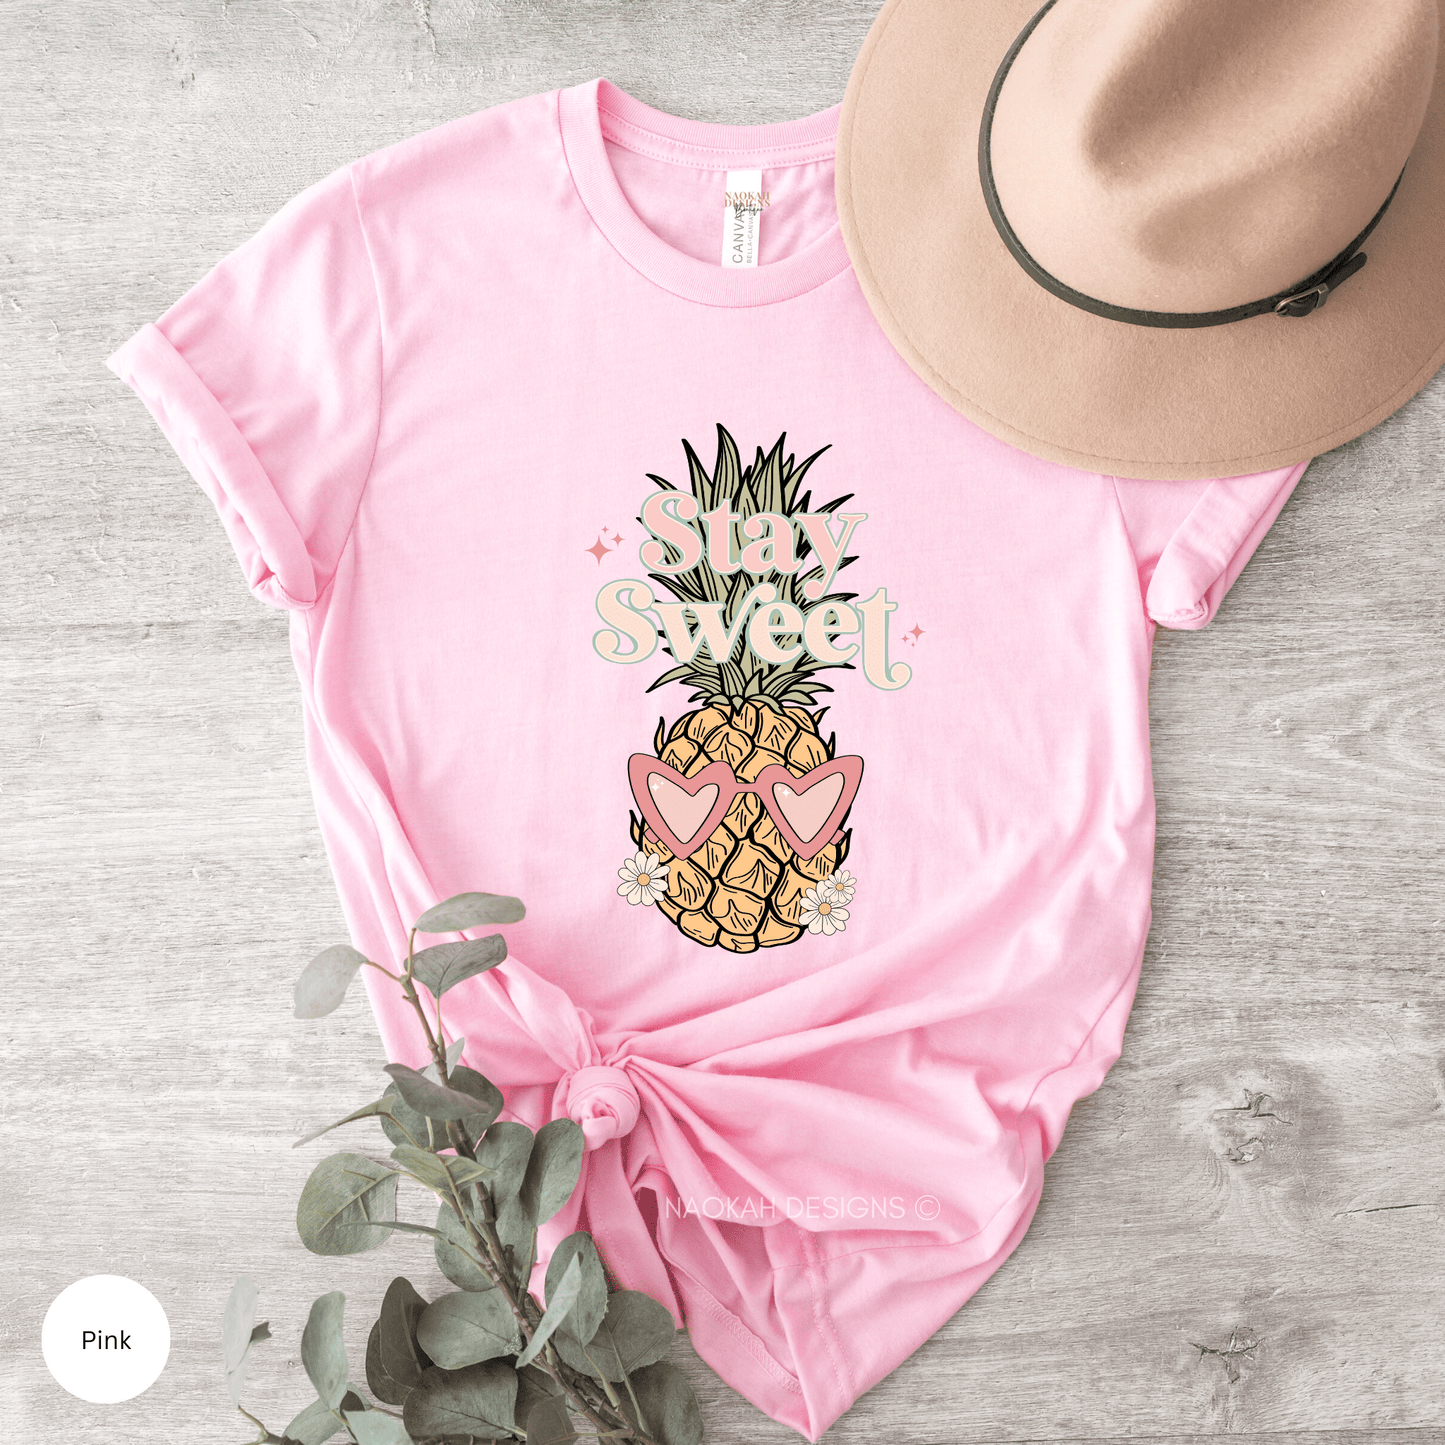 stay sweet, stay cool pineapple shirt, toddler pineapple shirt, kids stay cool pineapple shirt, youth stay sweet pineapple shirt, ivf mom shirt, ivf kids shirt, infertility tee